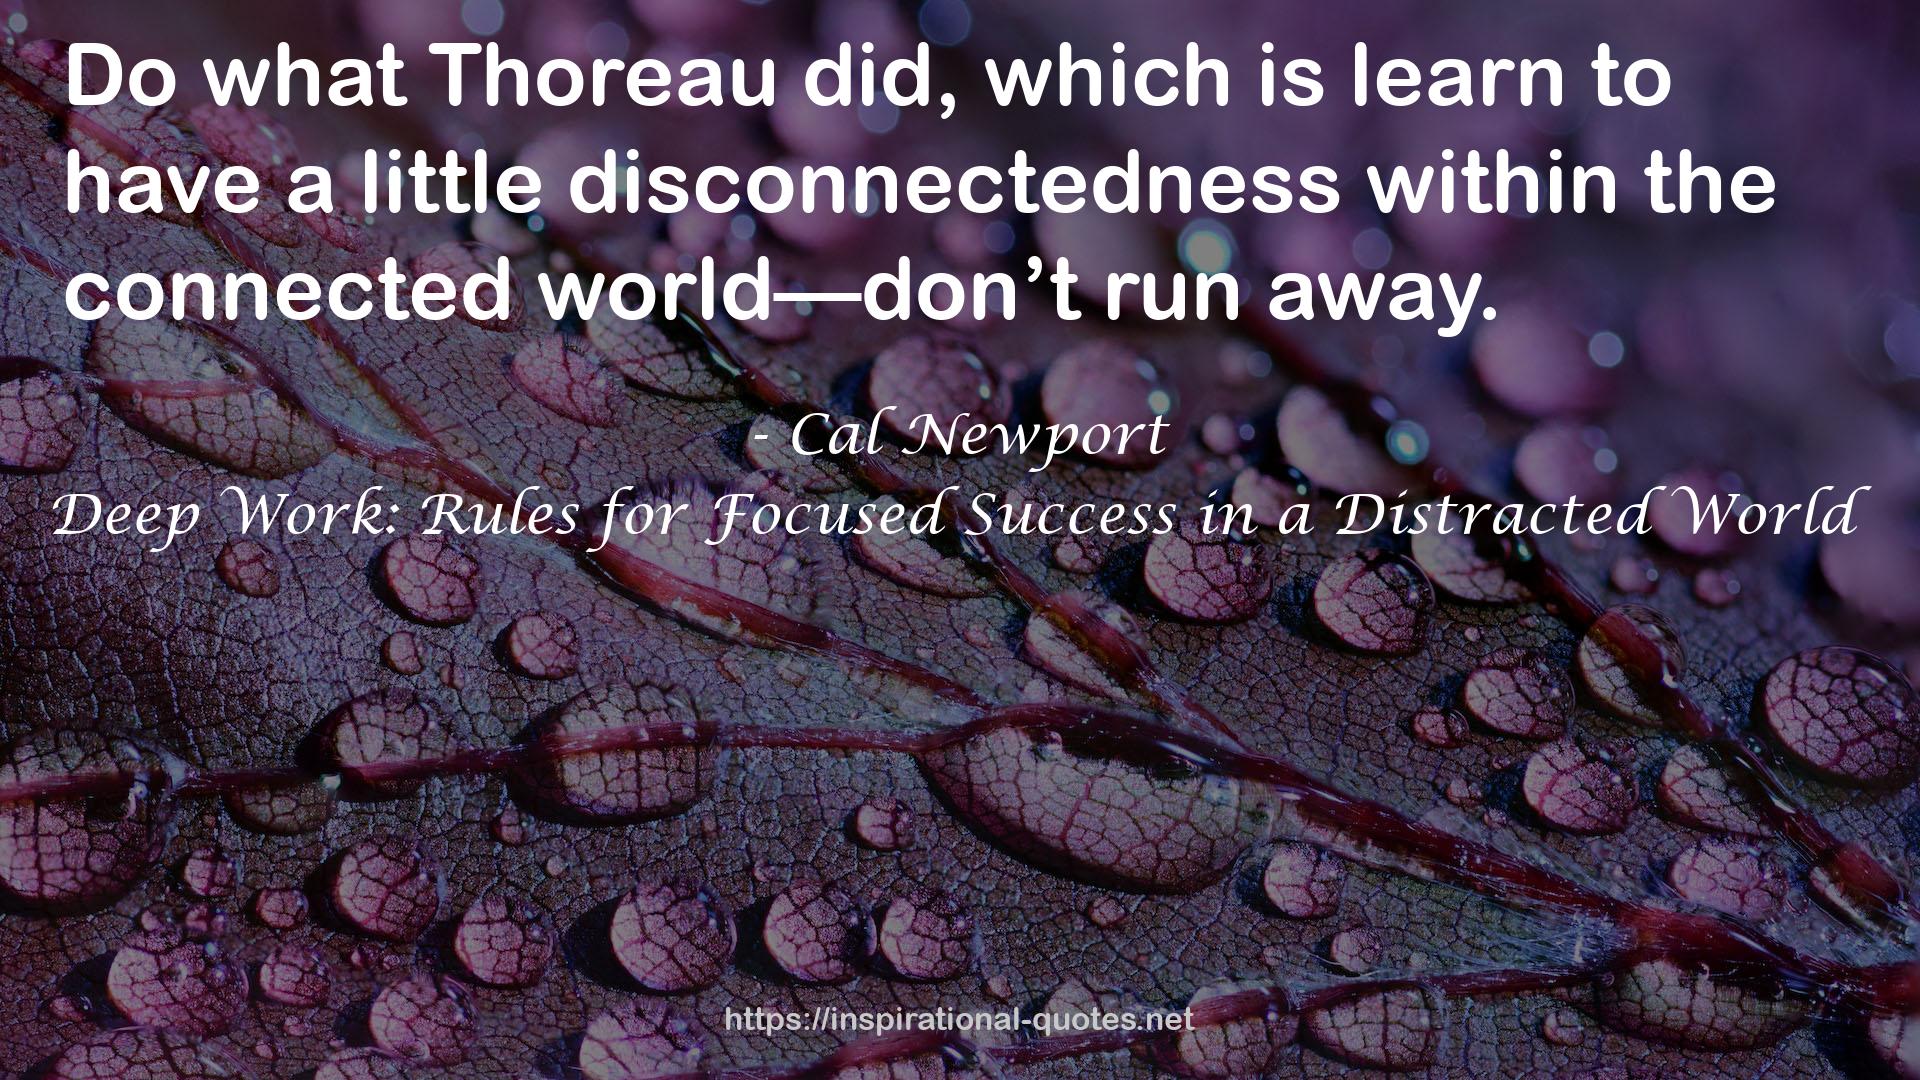 Deep Work: Rules for Focused Success in a Distracted World QUOTES